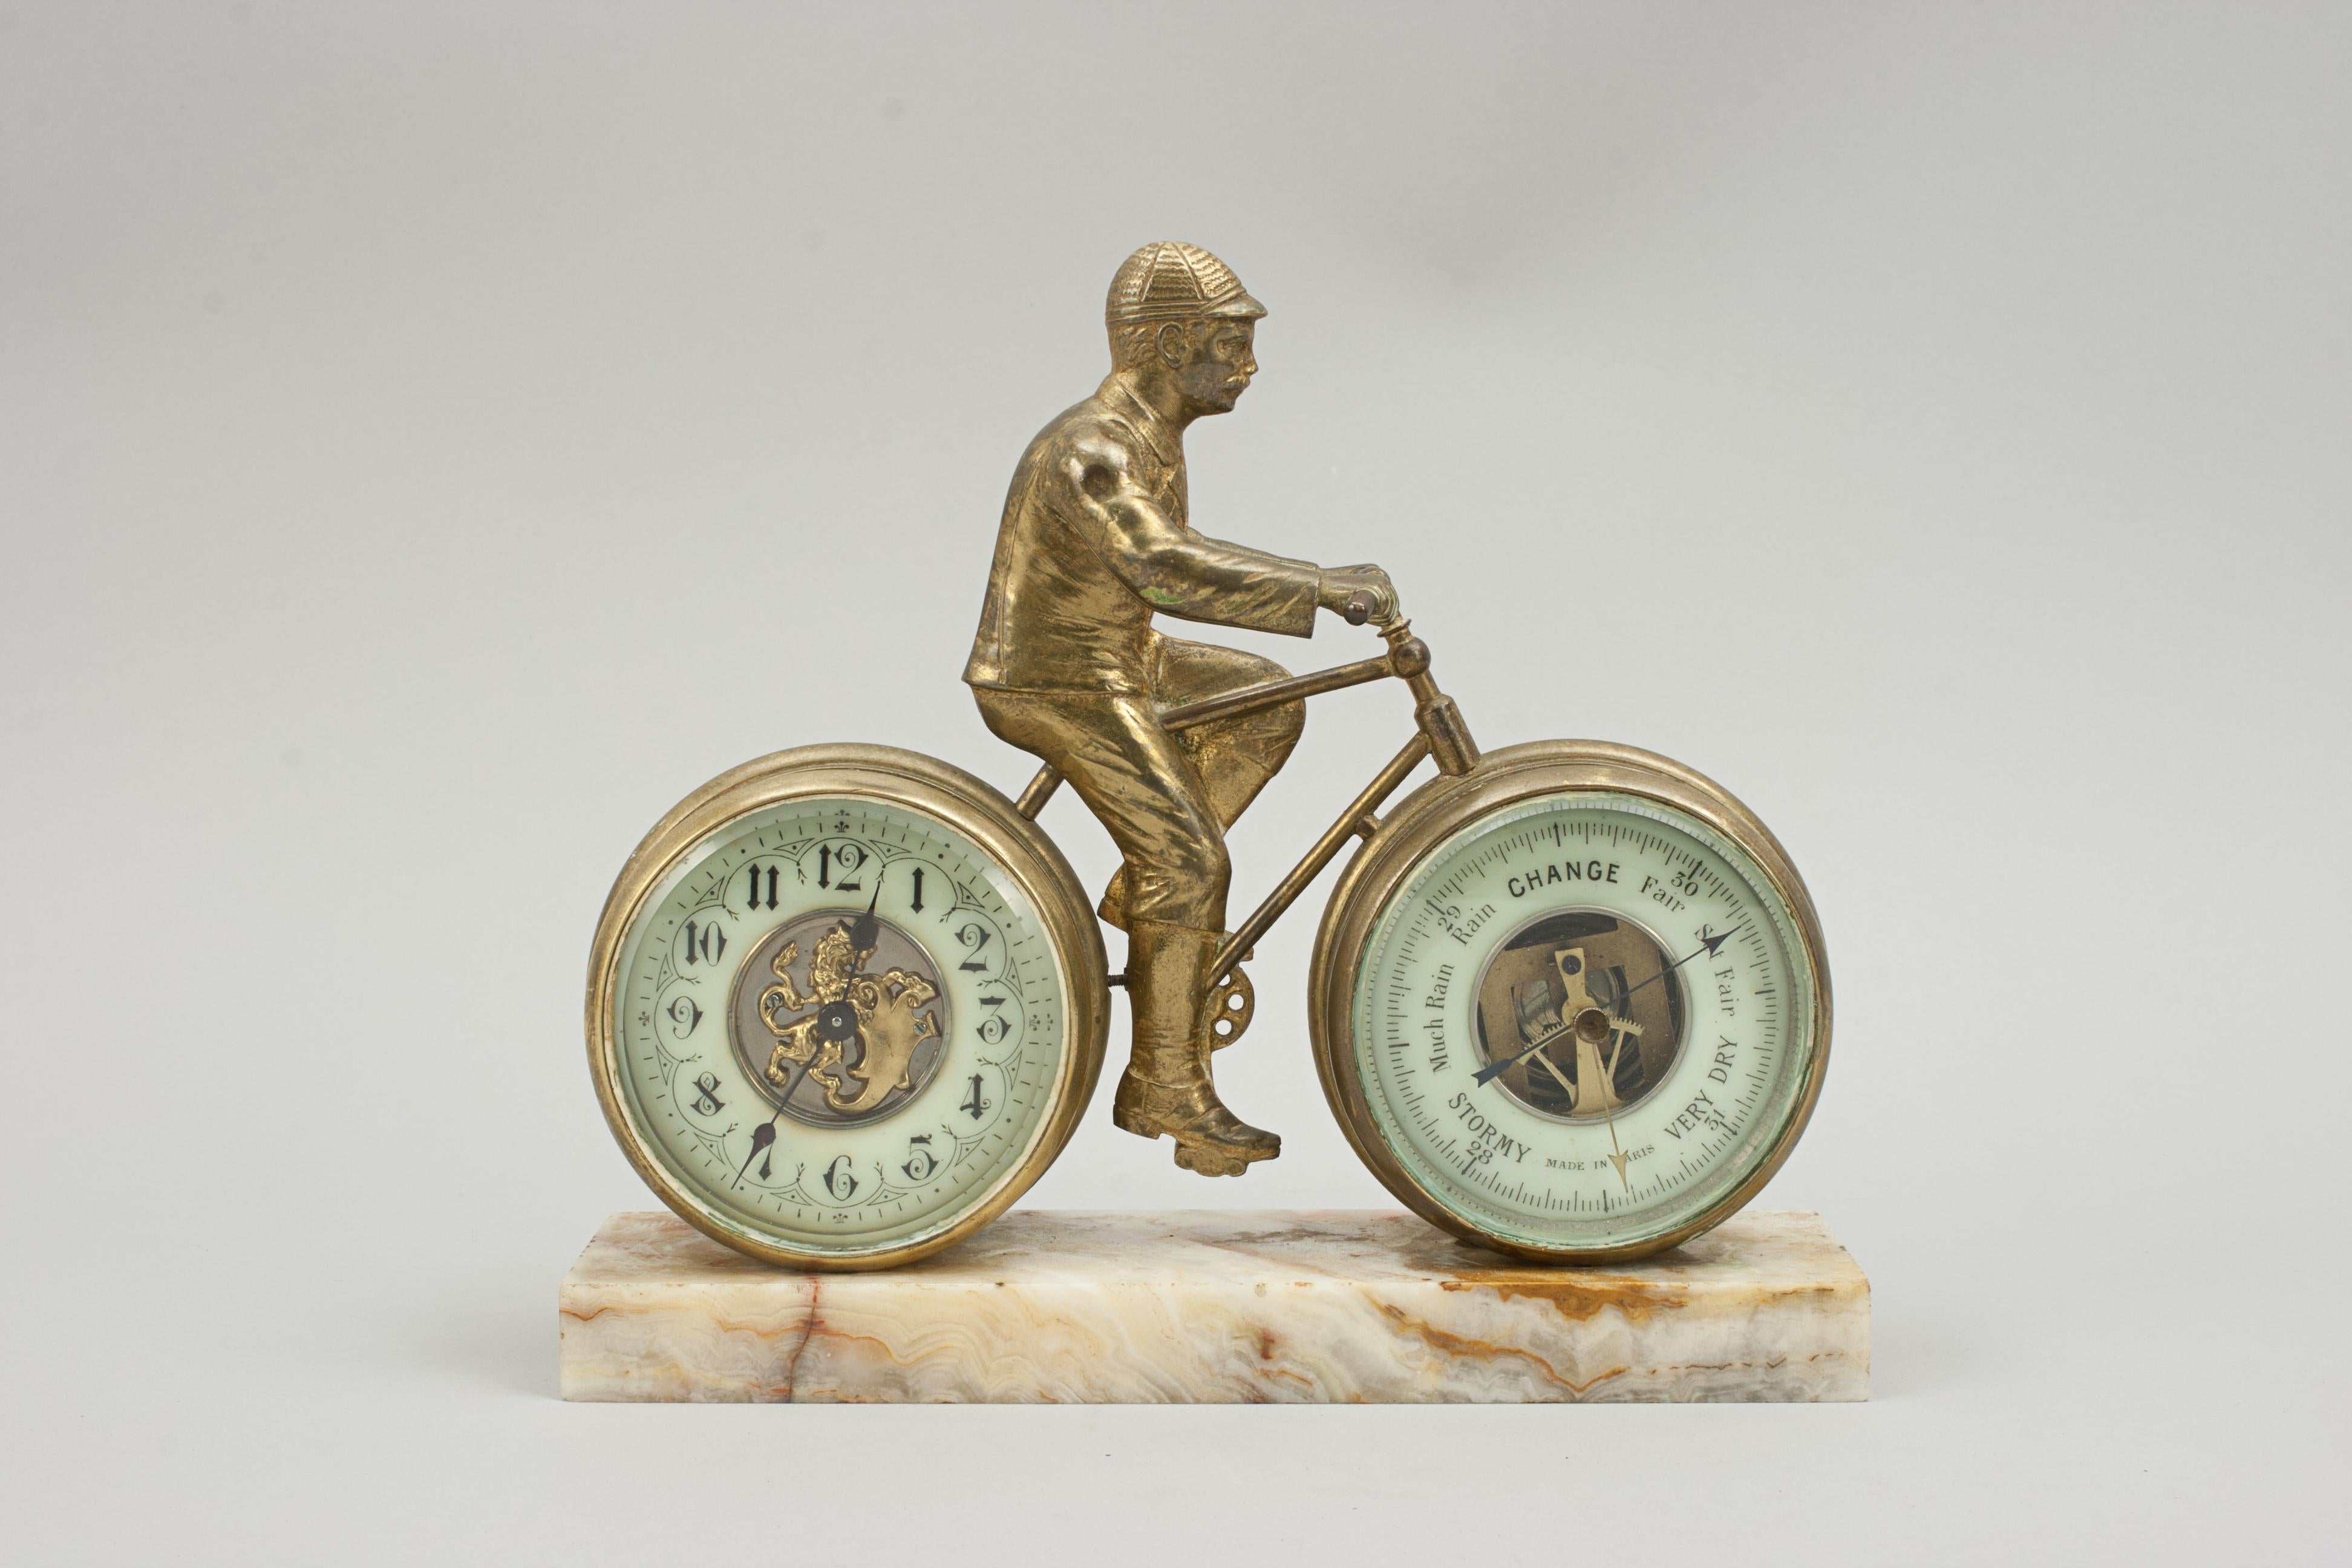 Sporting Art Novelty Desk Cycling Clock with Barometer